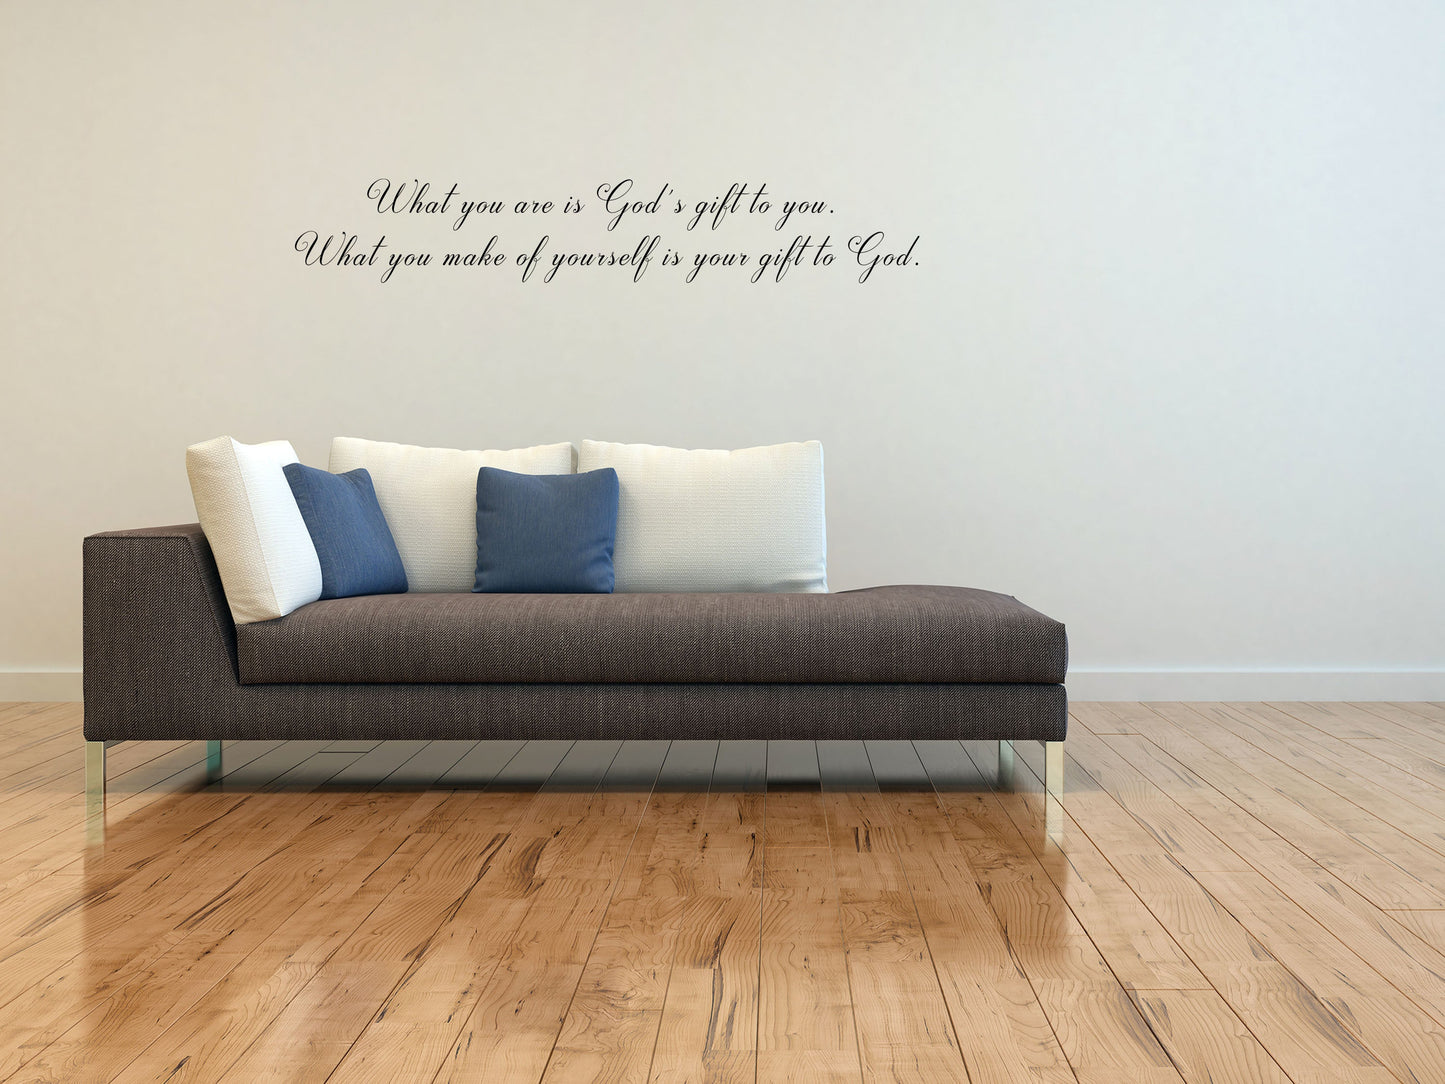 What You Are Is God's Gift To You - Inspirational Wall Decals Vinyl Wall Decal Inspirational Wall Signs 